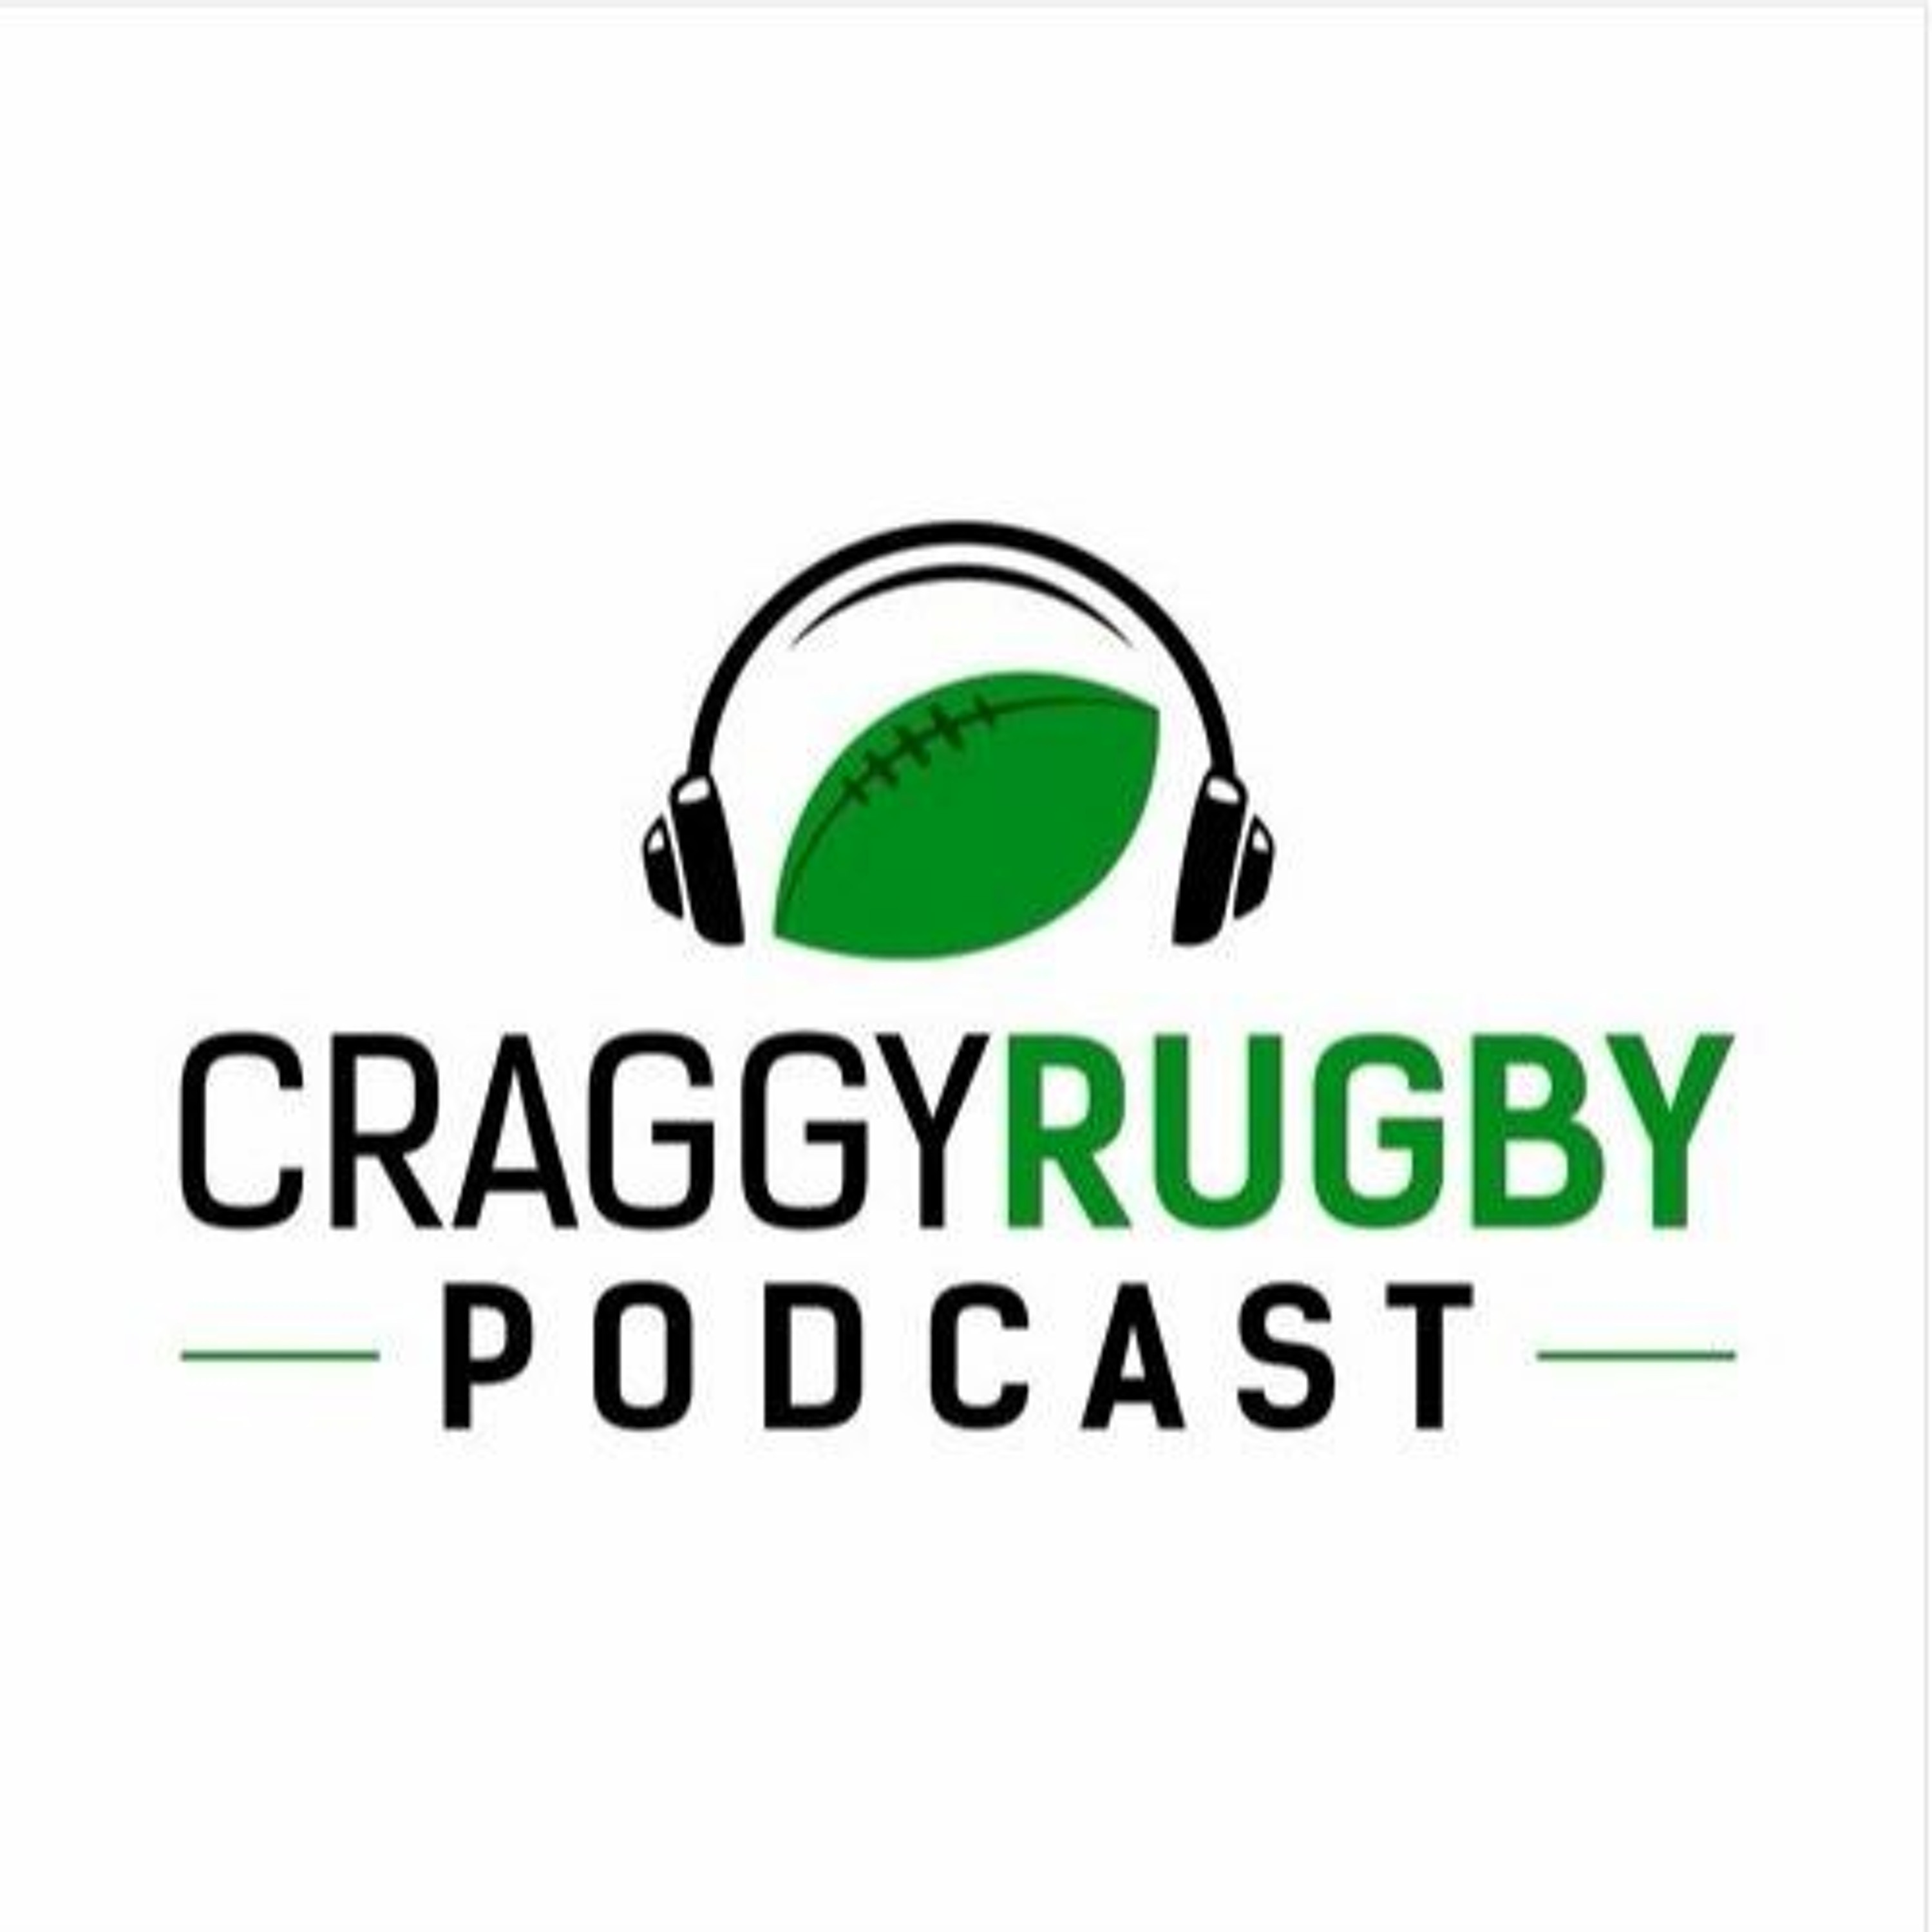 Dragons Outnumbered - Dragons 25 Connacht 30 - Craggy Rugby podcast